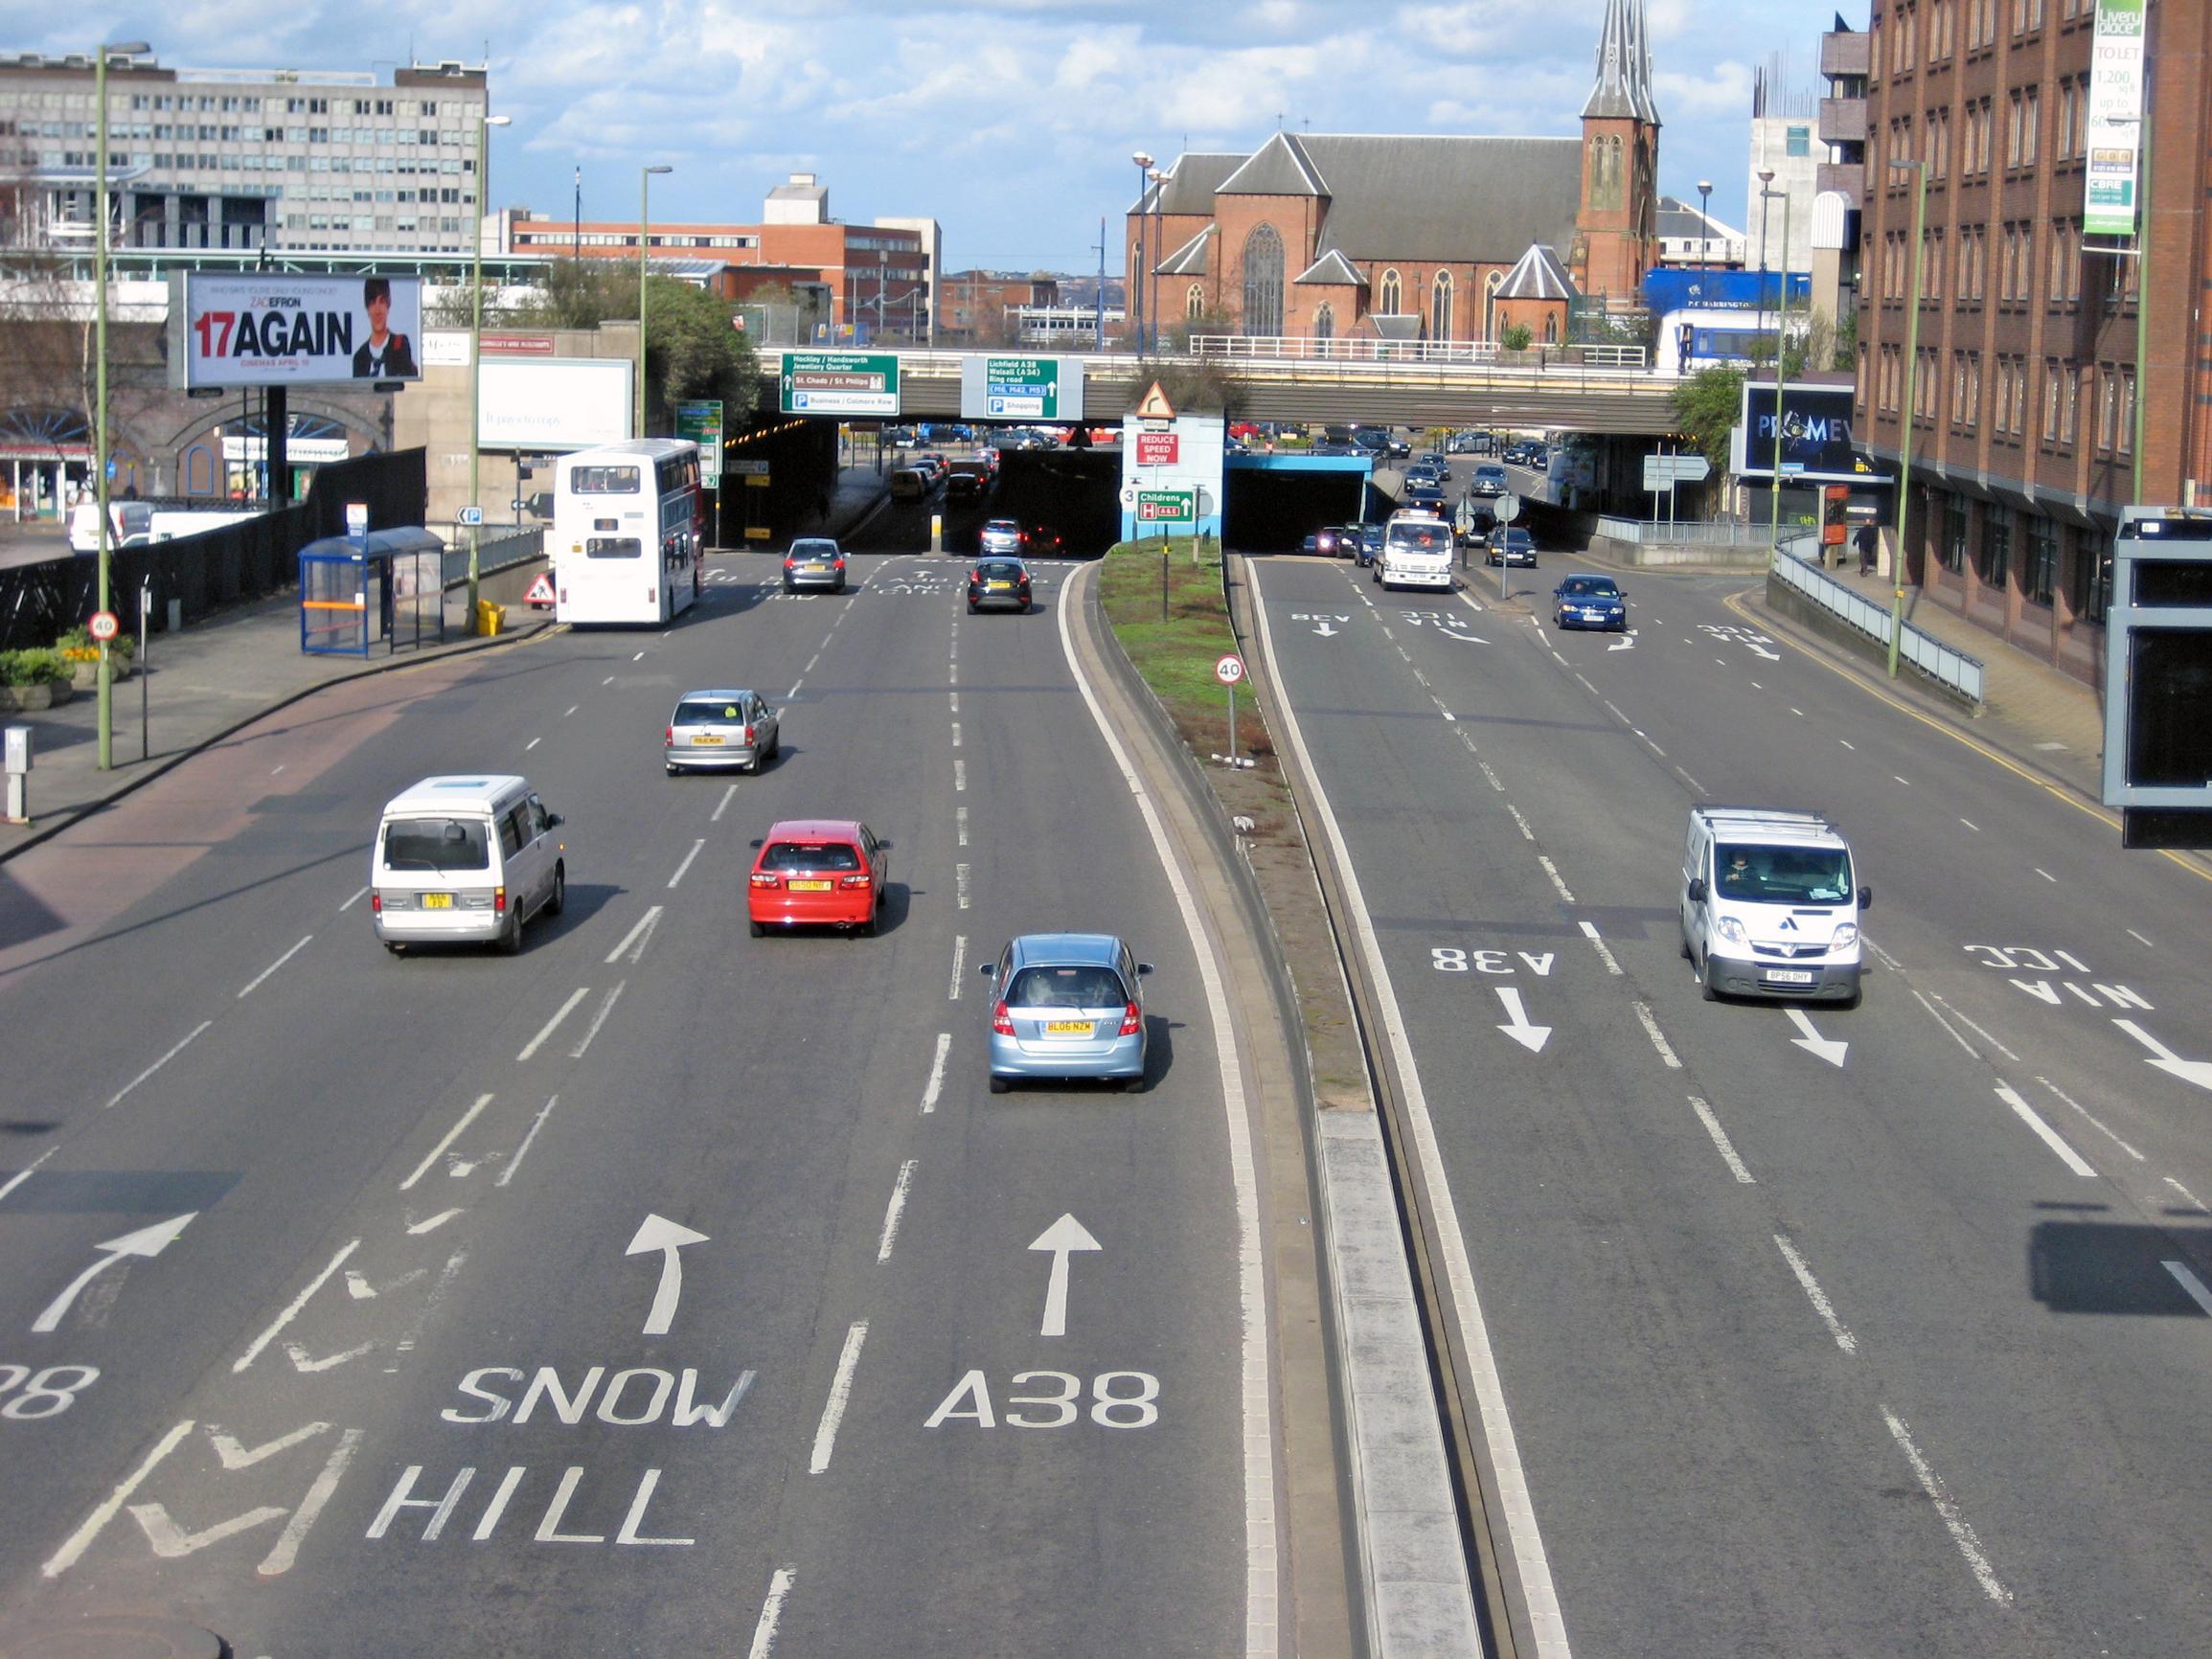 Birmingham’s Clean Air Zones comes into force on 1 June 2021 and will cover the area inside the inner ring road (A4540 Middleway)